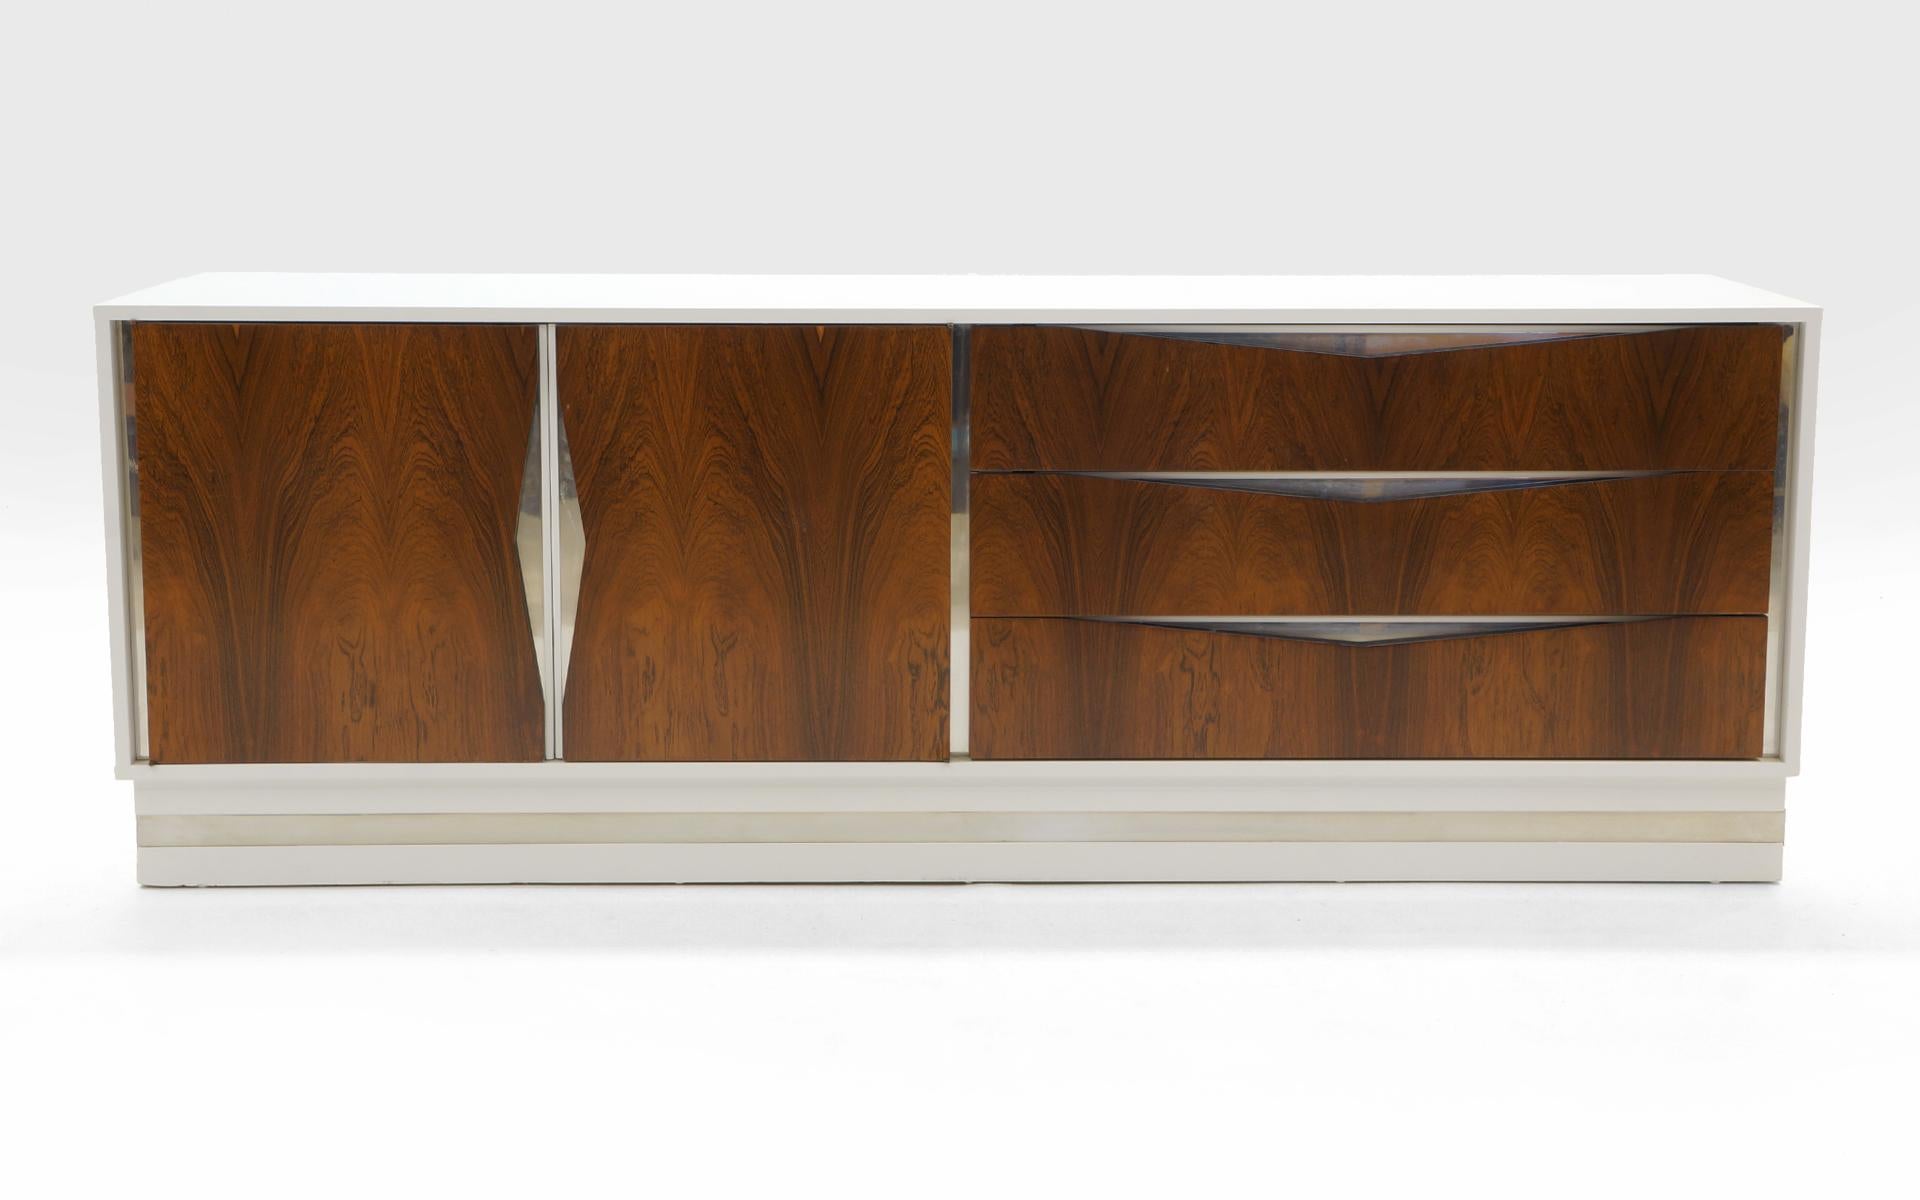 Stunning white, rosewood and chrome dresser attributed to Milo Baughman. We also have a listing for the matching nightstands. This cabinet has been expertly restored with a white conversion varnish finish (better than lacquer). The rosewood and